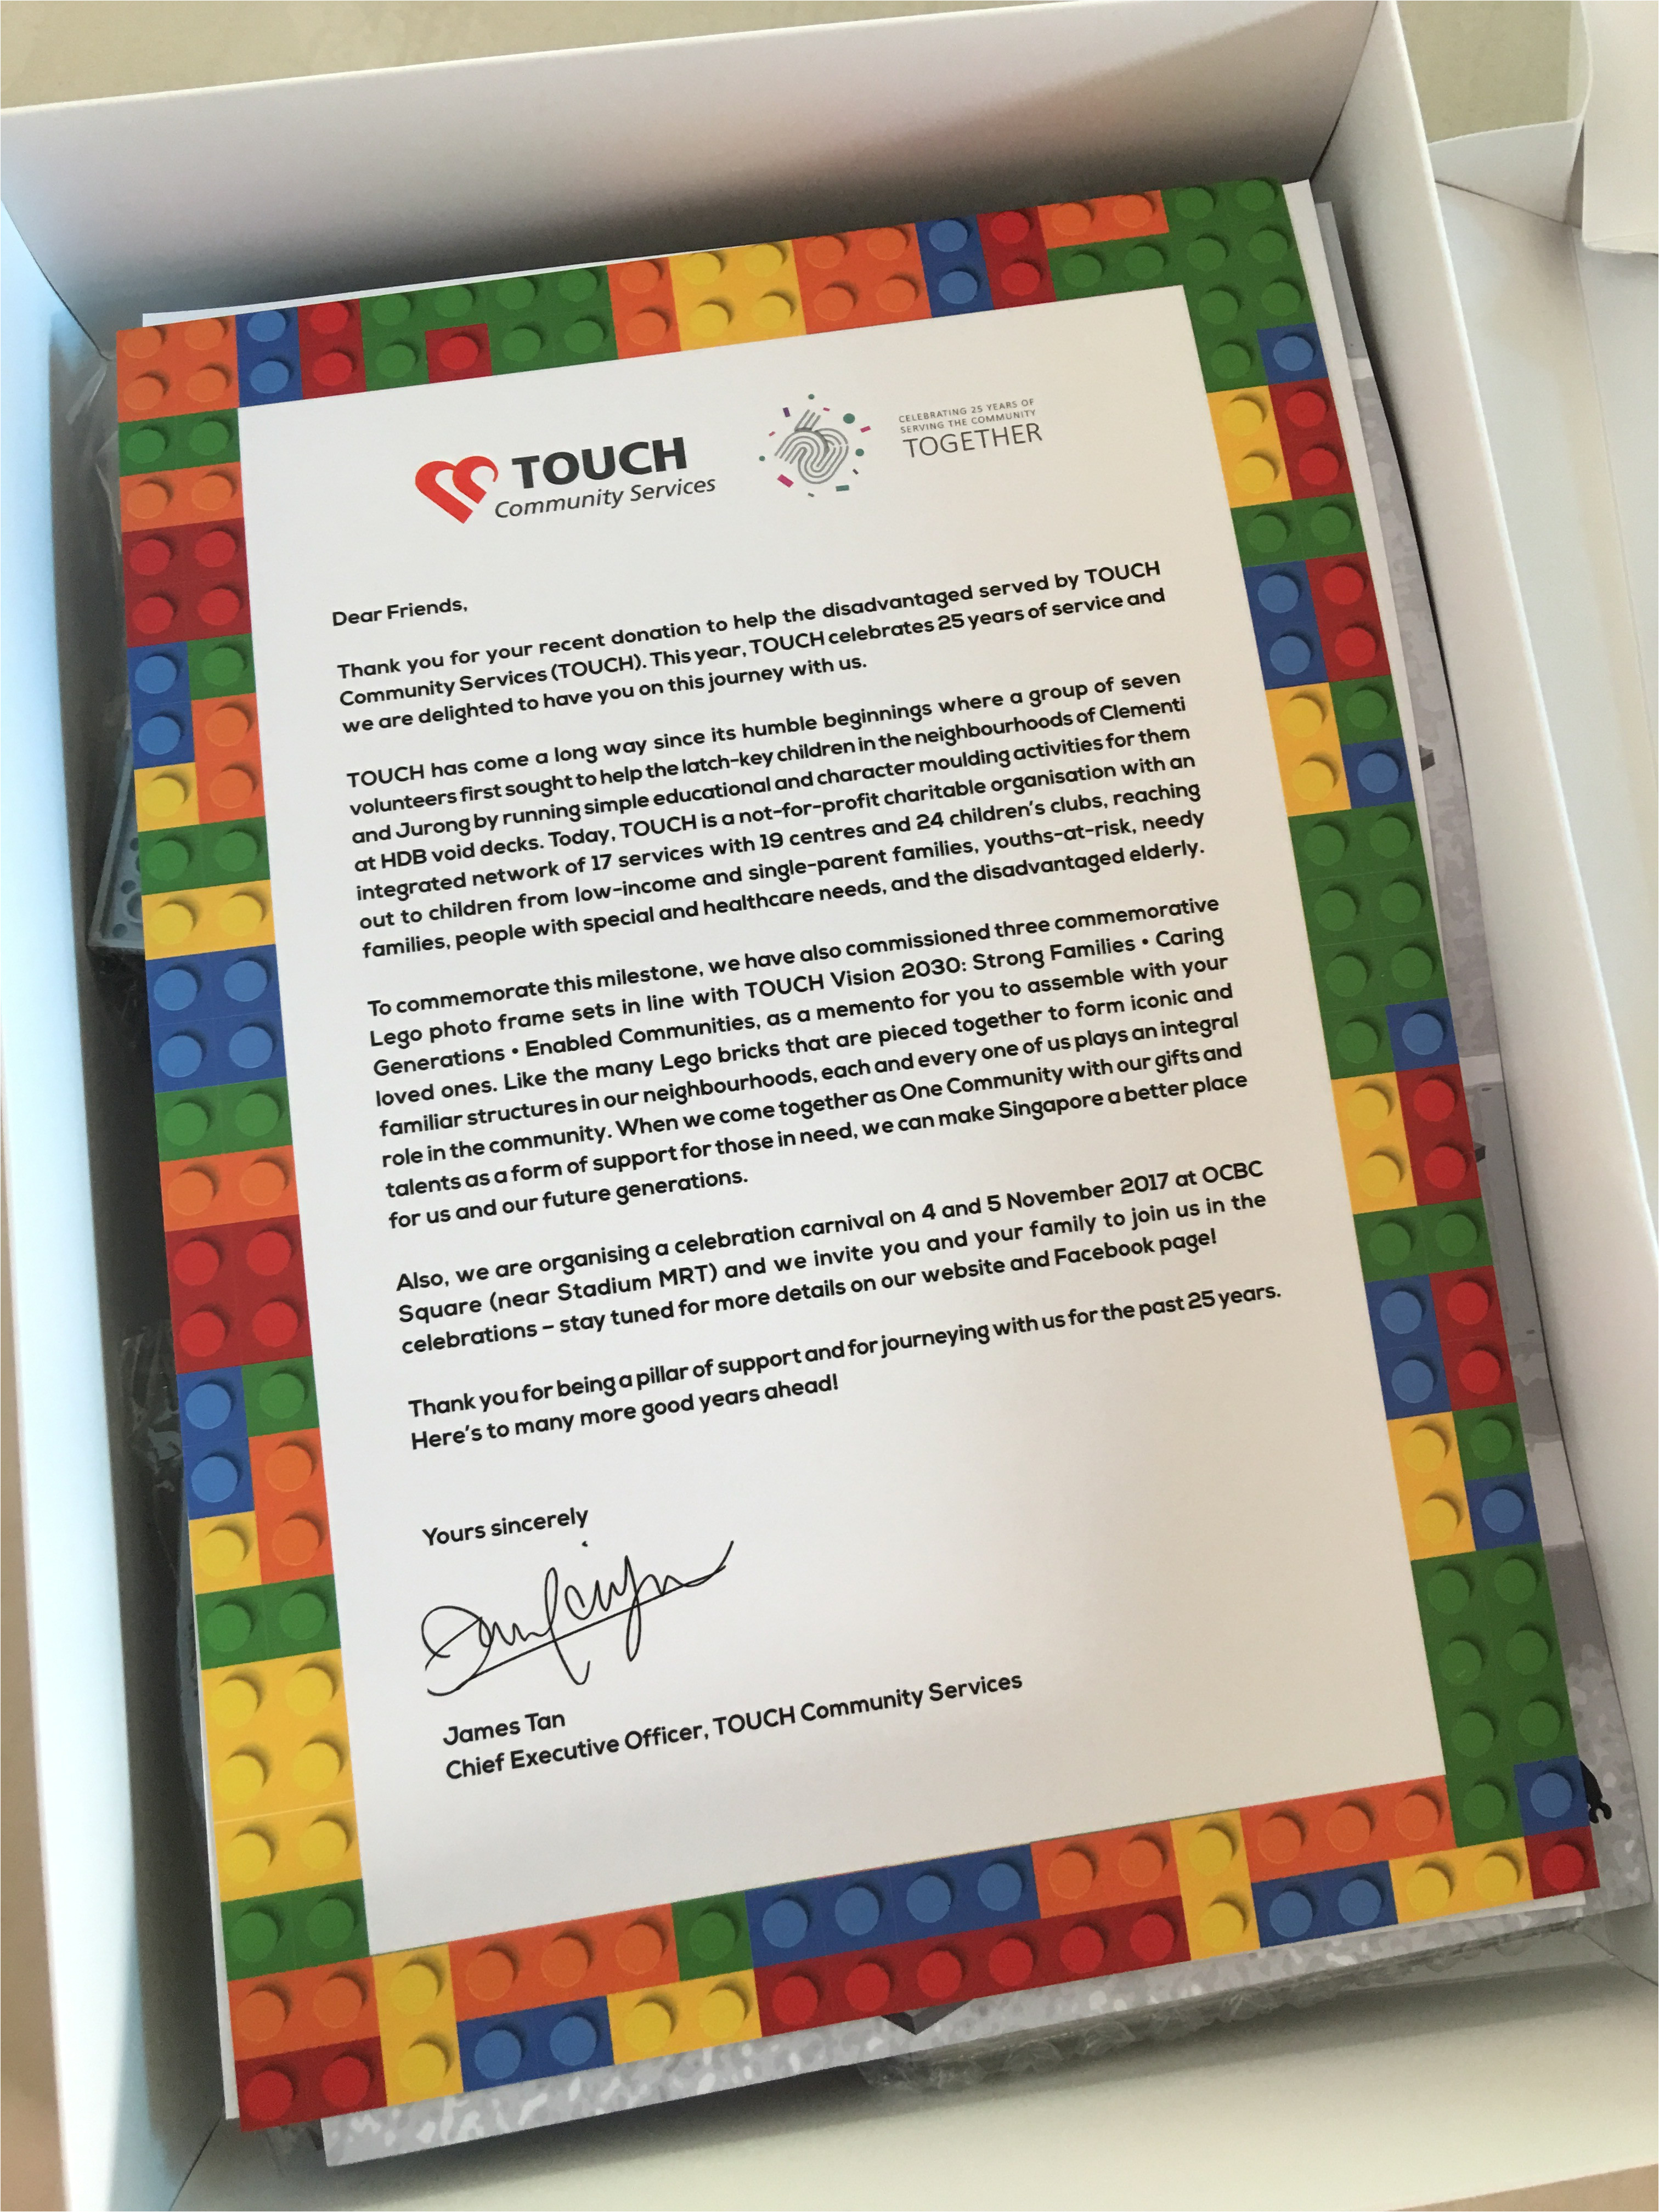 touch community services 25th anniversary limited edition lego set